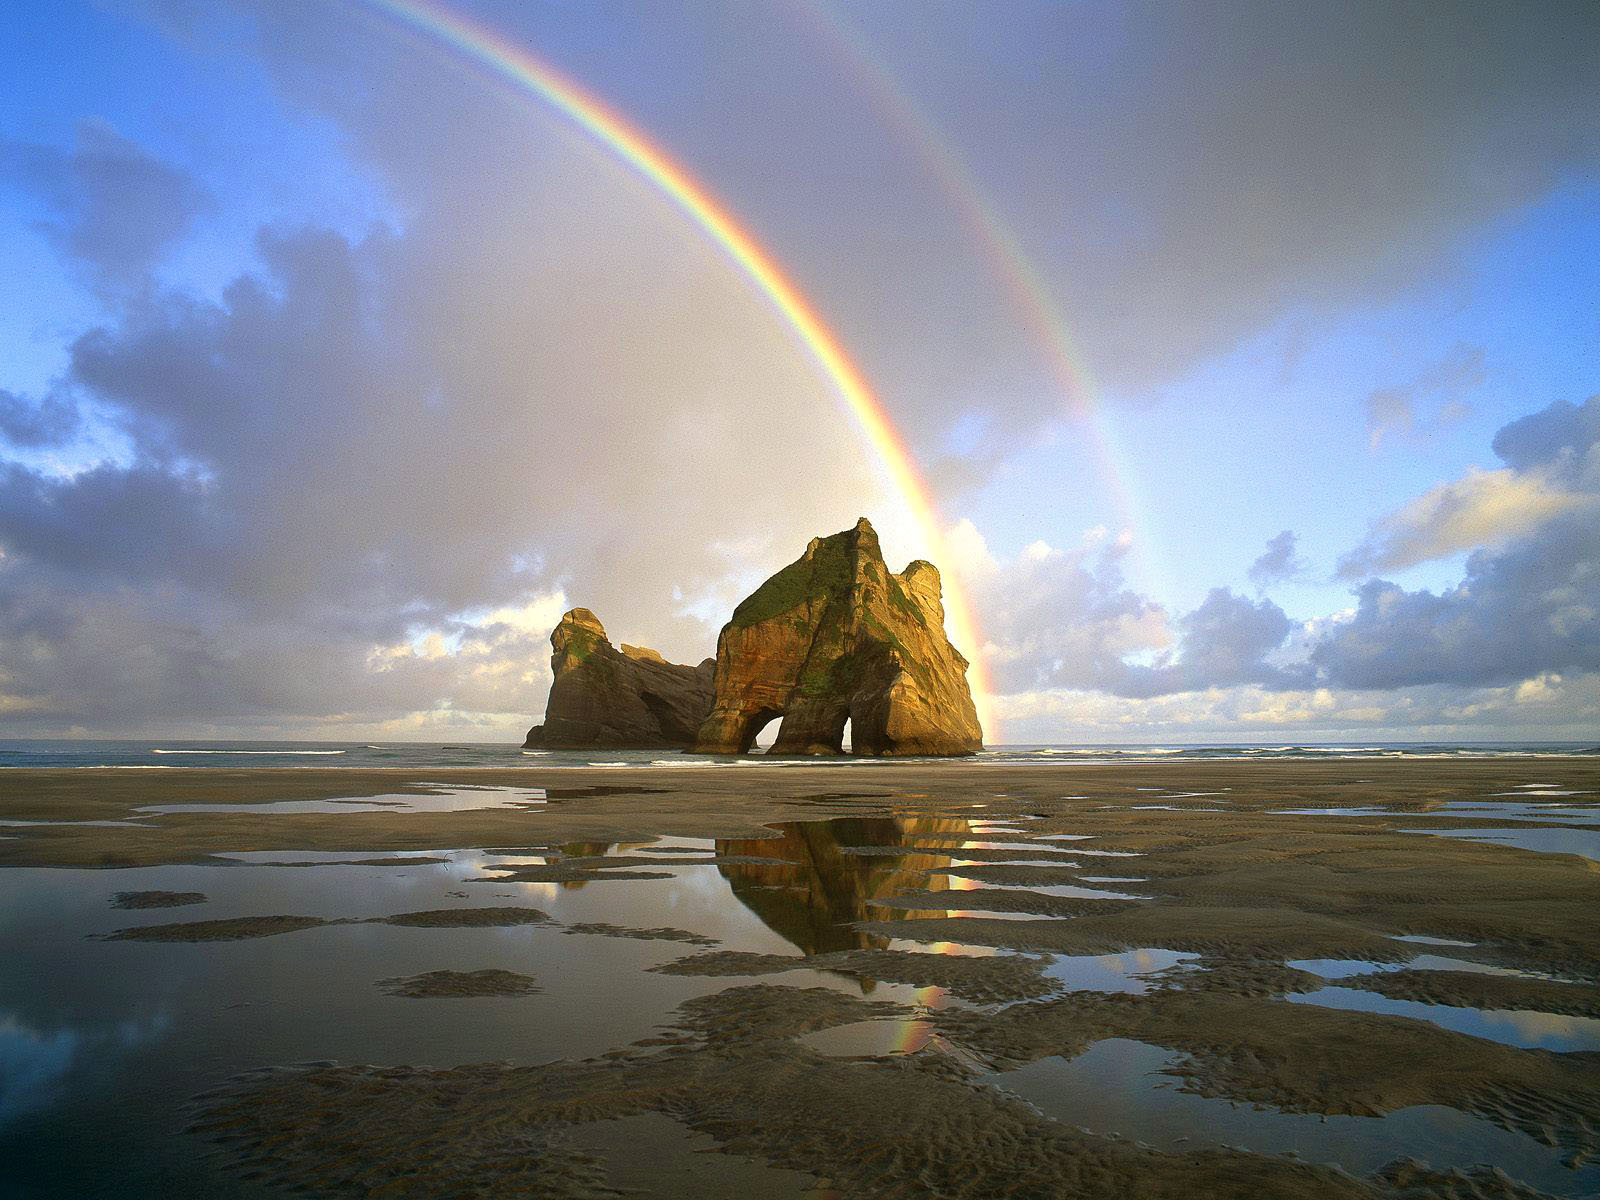 Of The Worlds Most Beautiful Rainbow Photography Examples